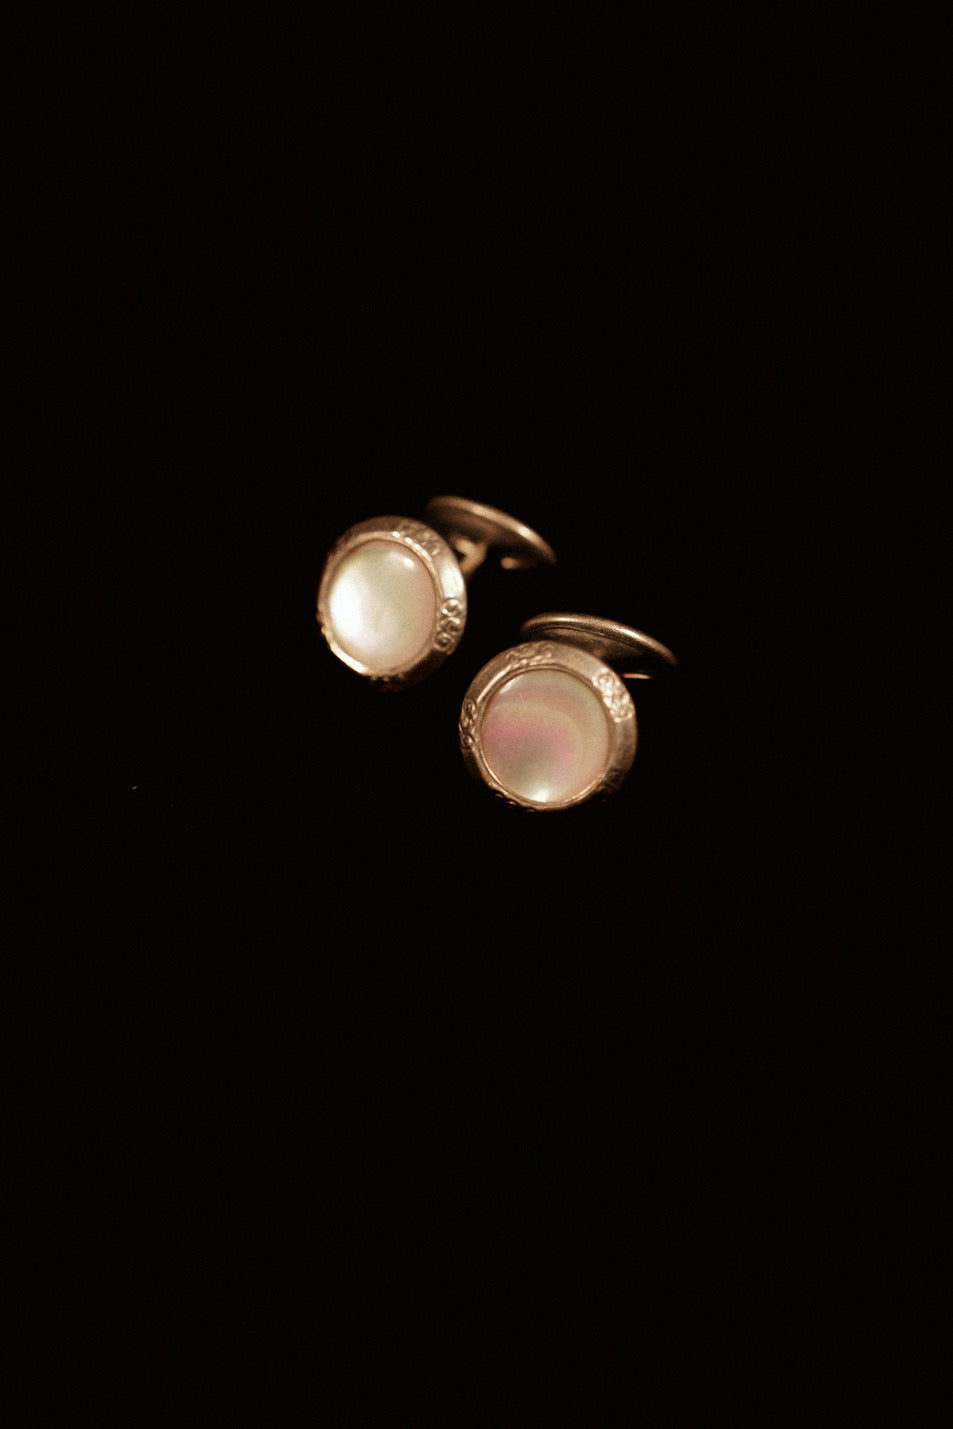 Art Deco 1920s Cufflinks Featuring A Rose Tinted Mother Of Pearl Face